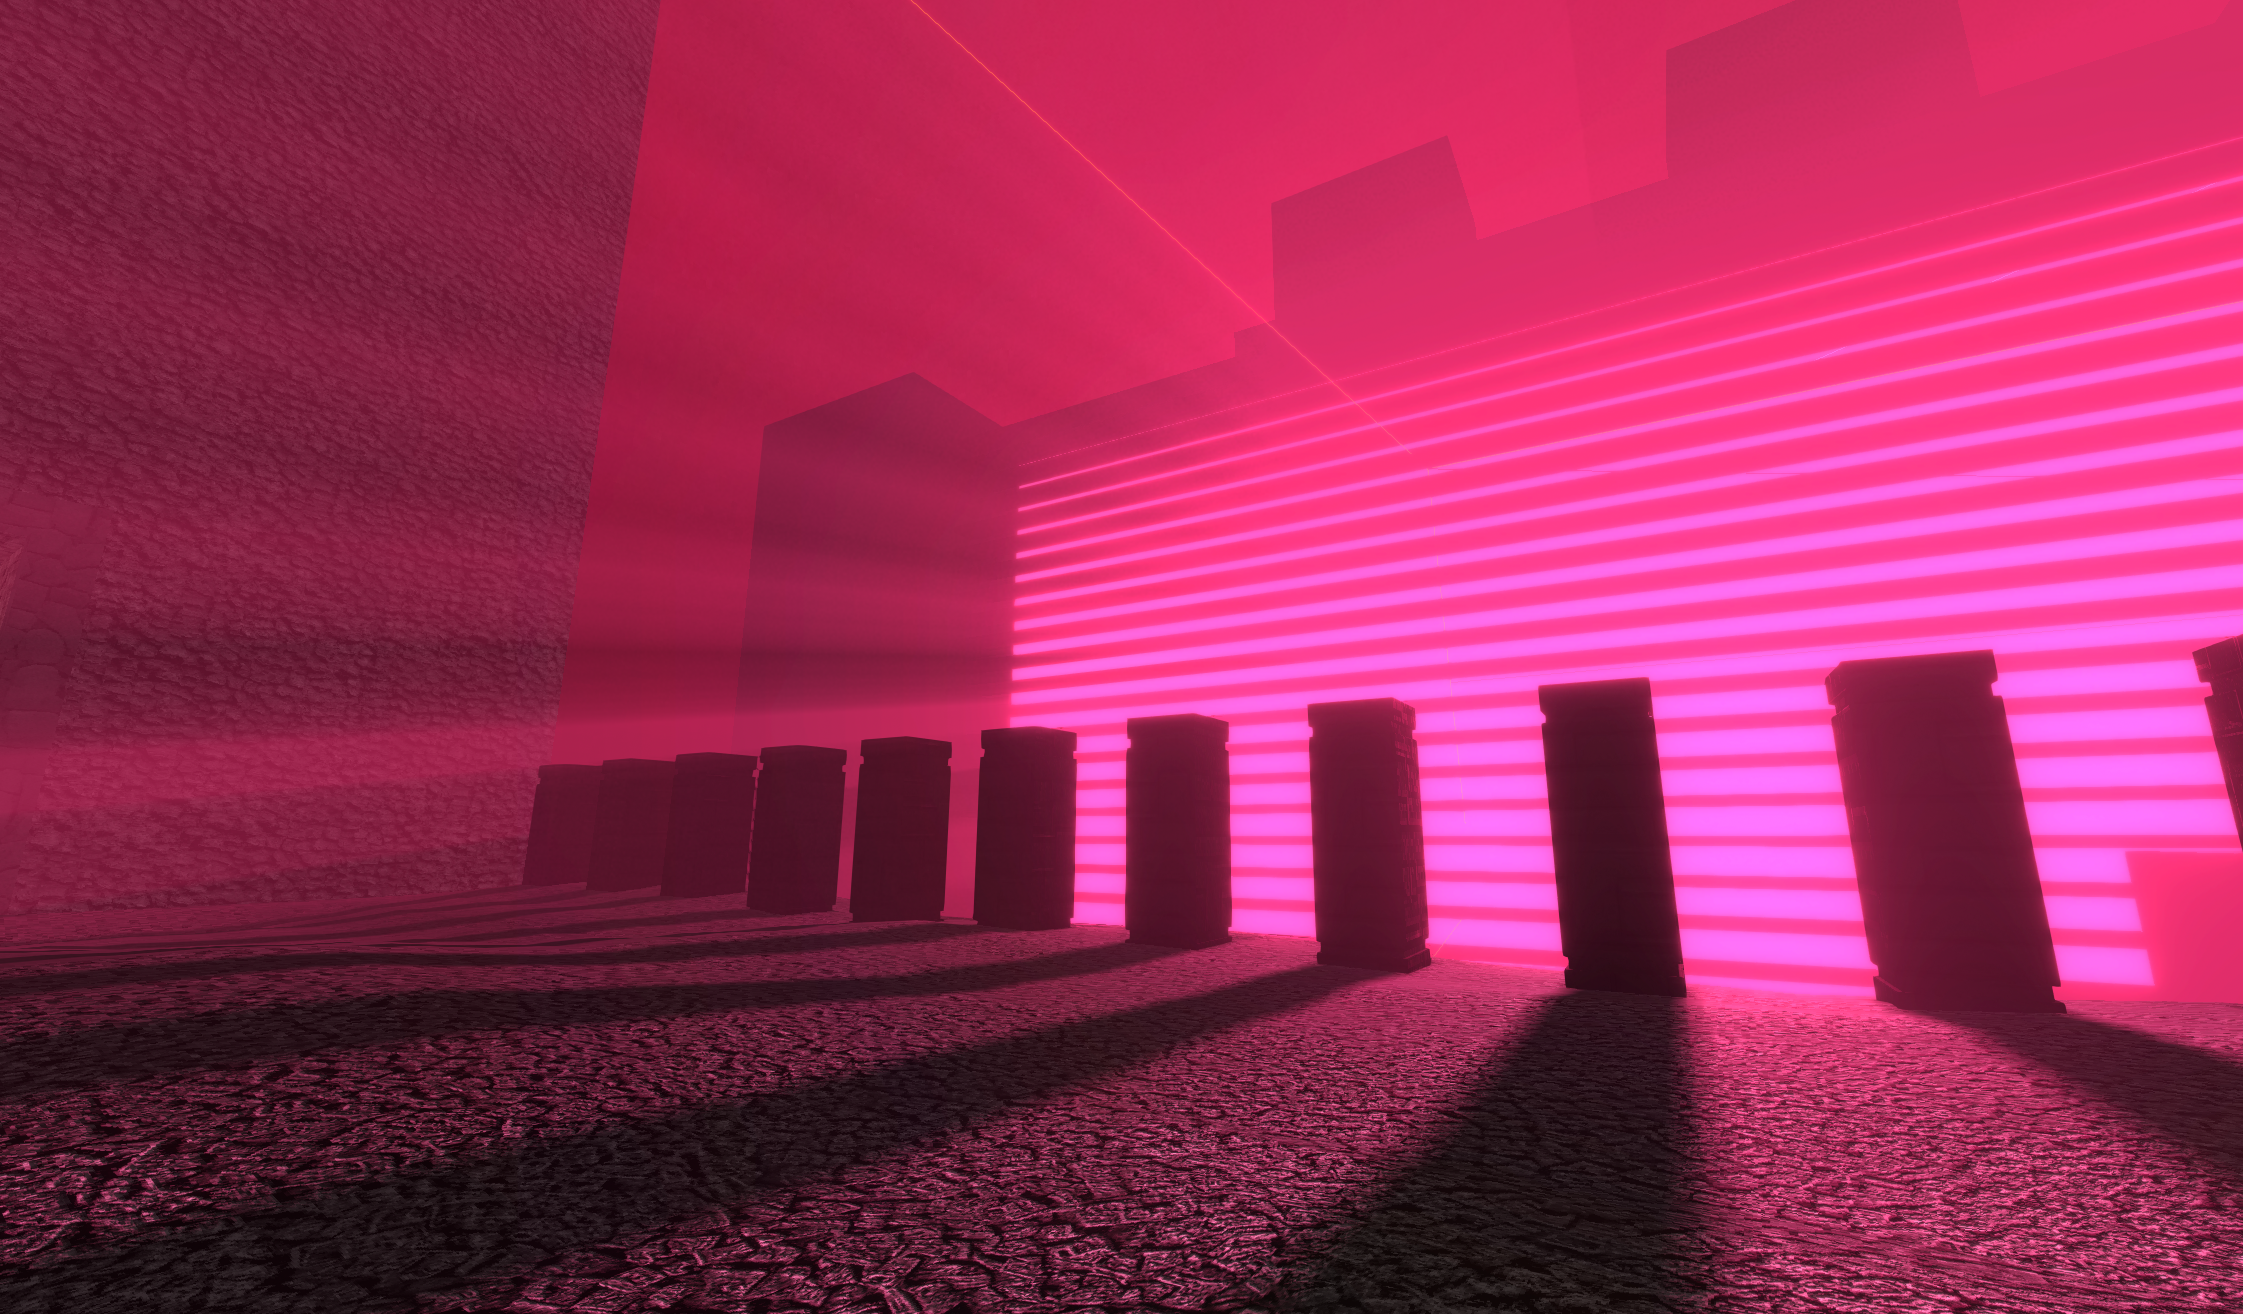 A bright pink light shines through a vertical array of black slats set in the side of a huge indistinct black structure in the background.  There are very prominent and intense godrays in the air, giving it the appearance of being very humid or smokey.  The ground is rock and there are black pillars casting long and stark shadows across it.